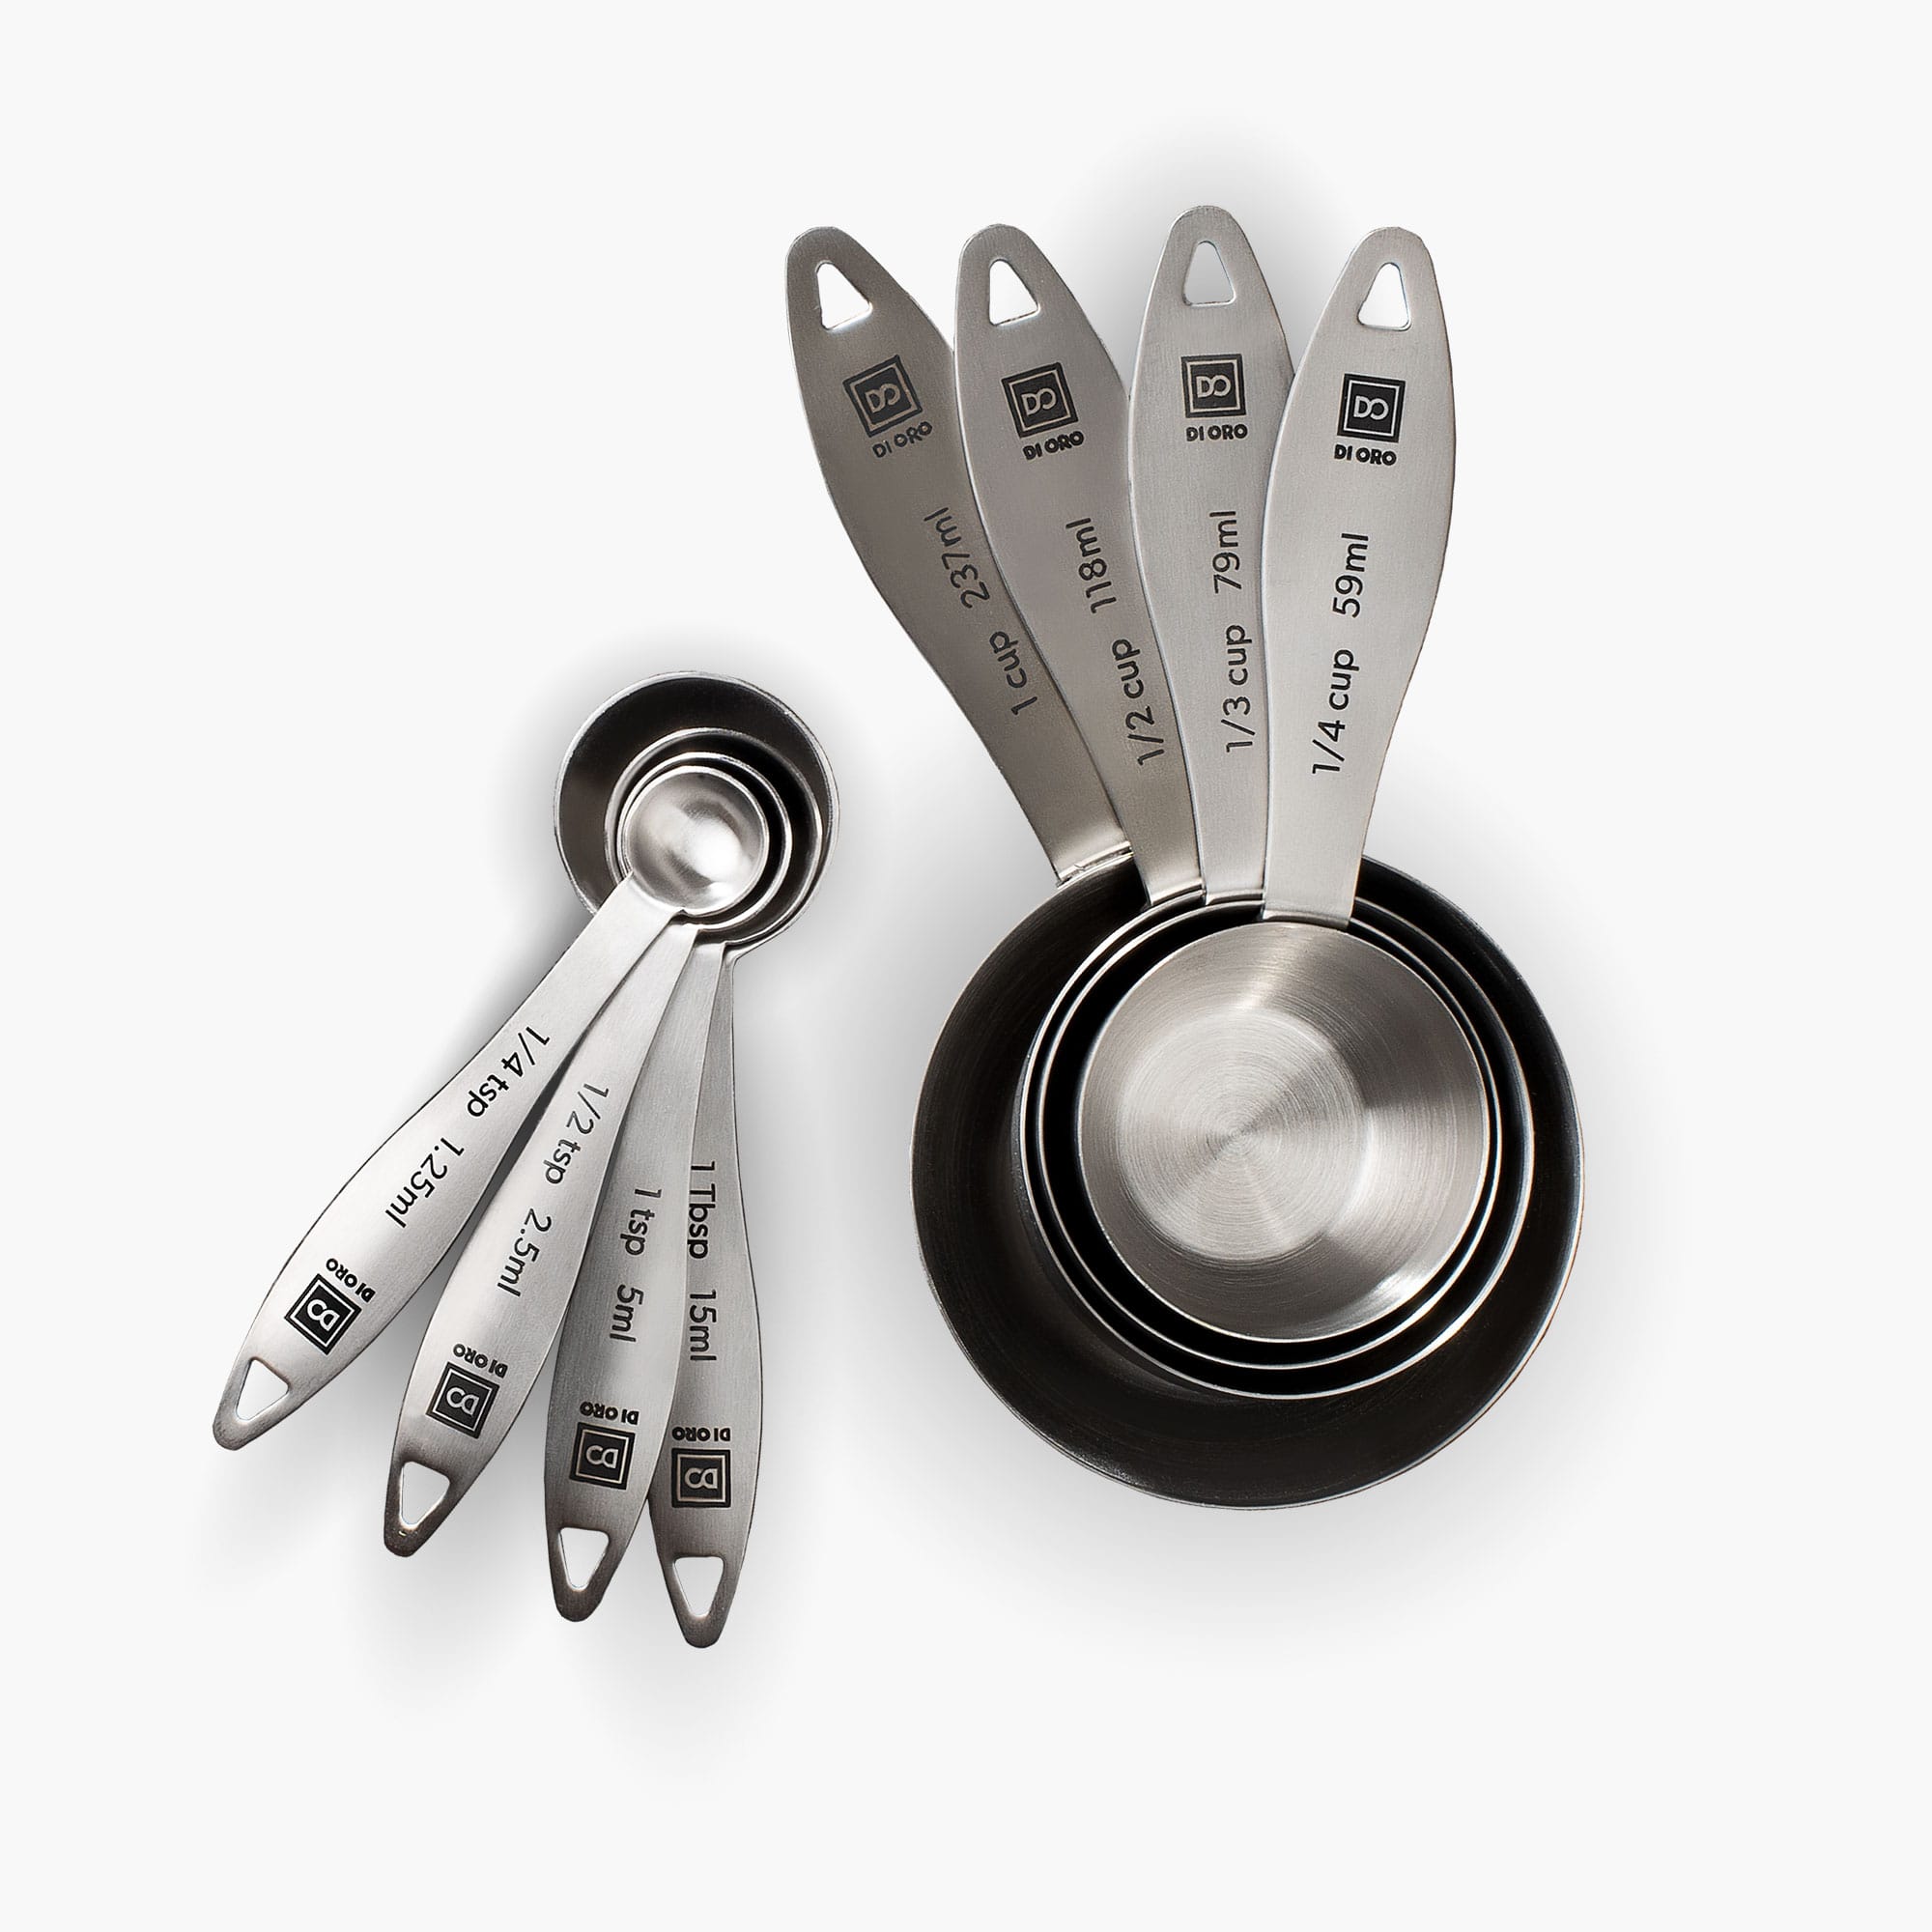 Measuring Cups and Spoon Set of 15